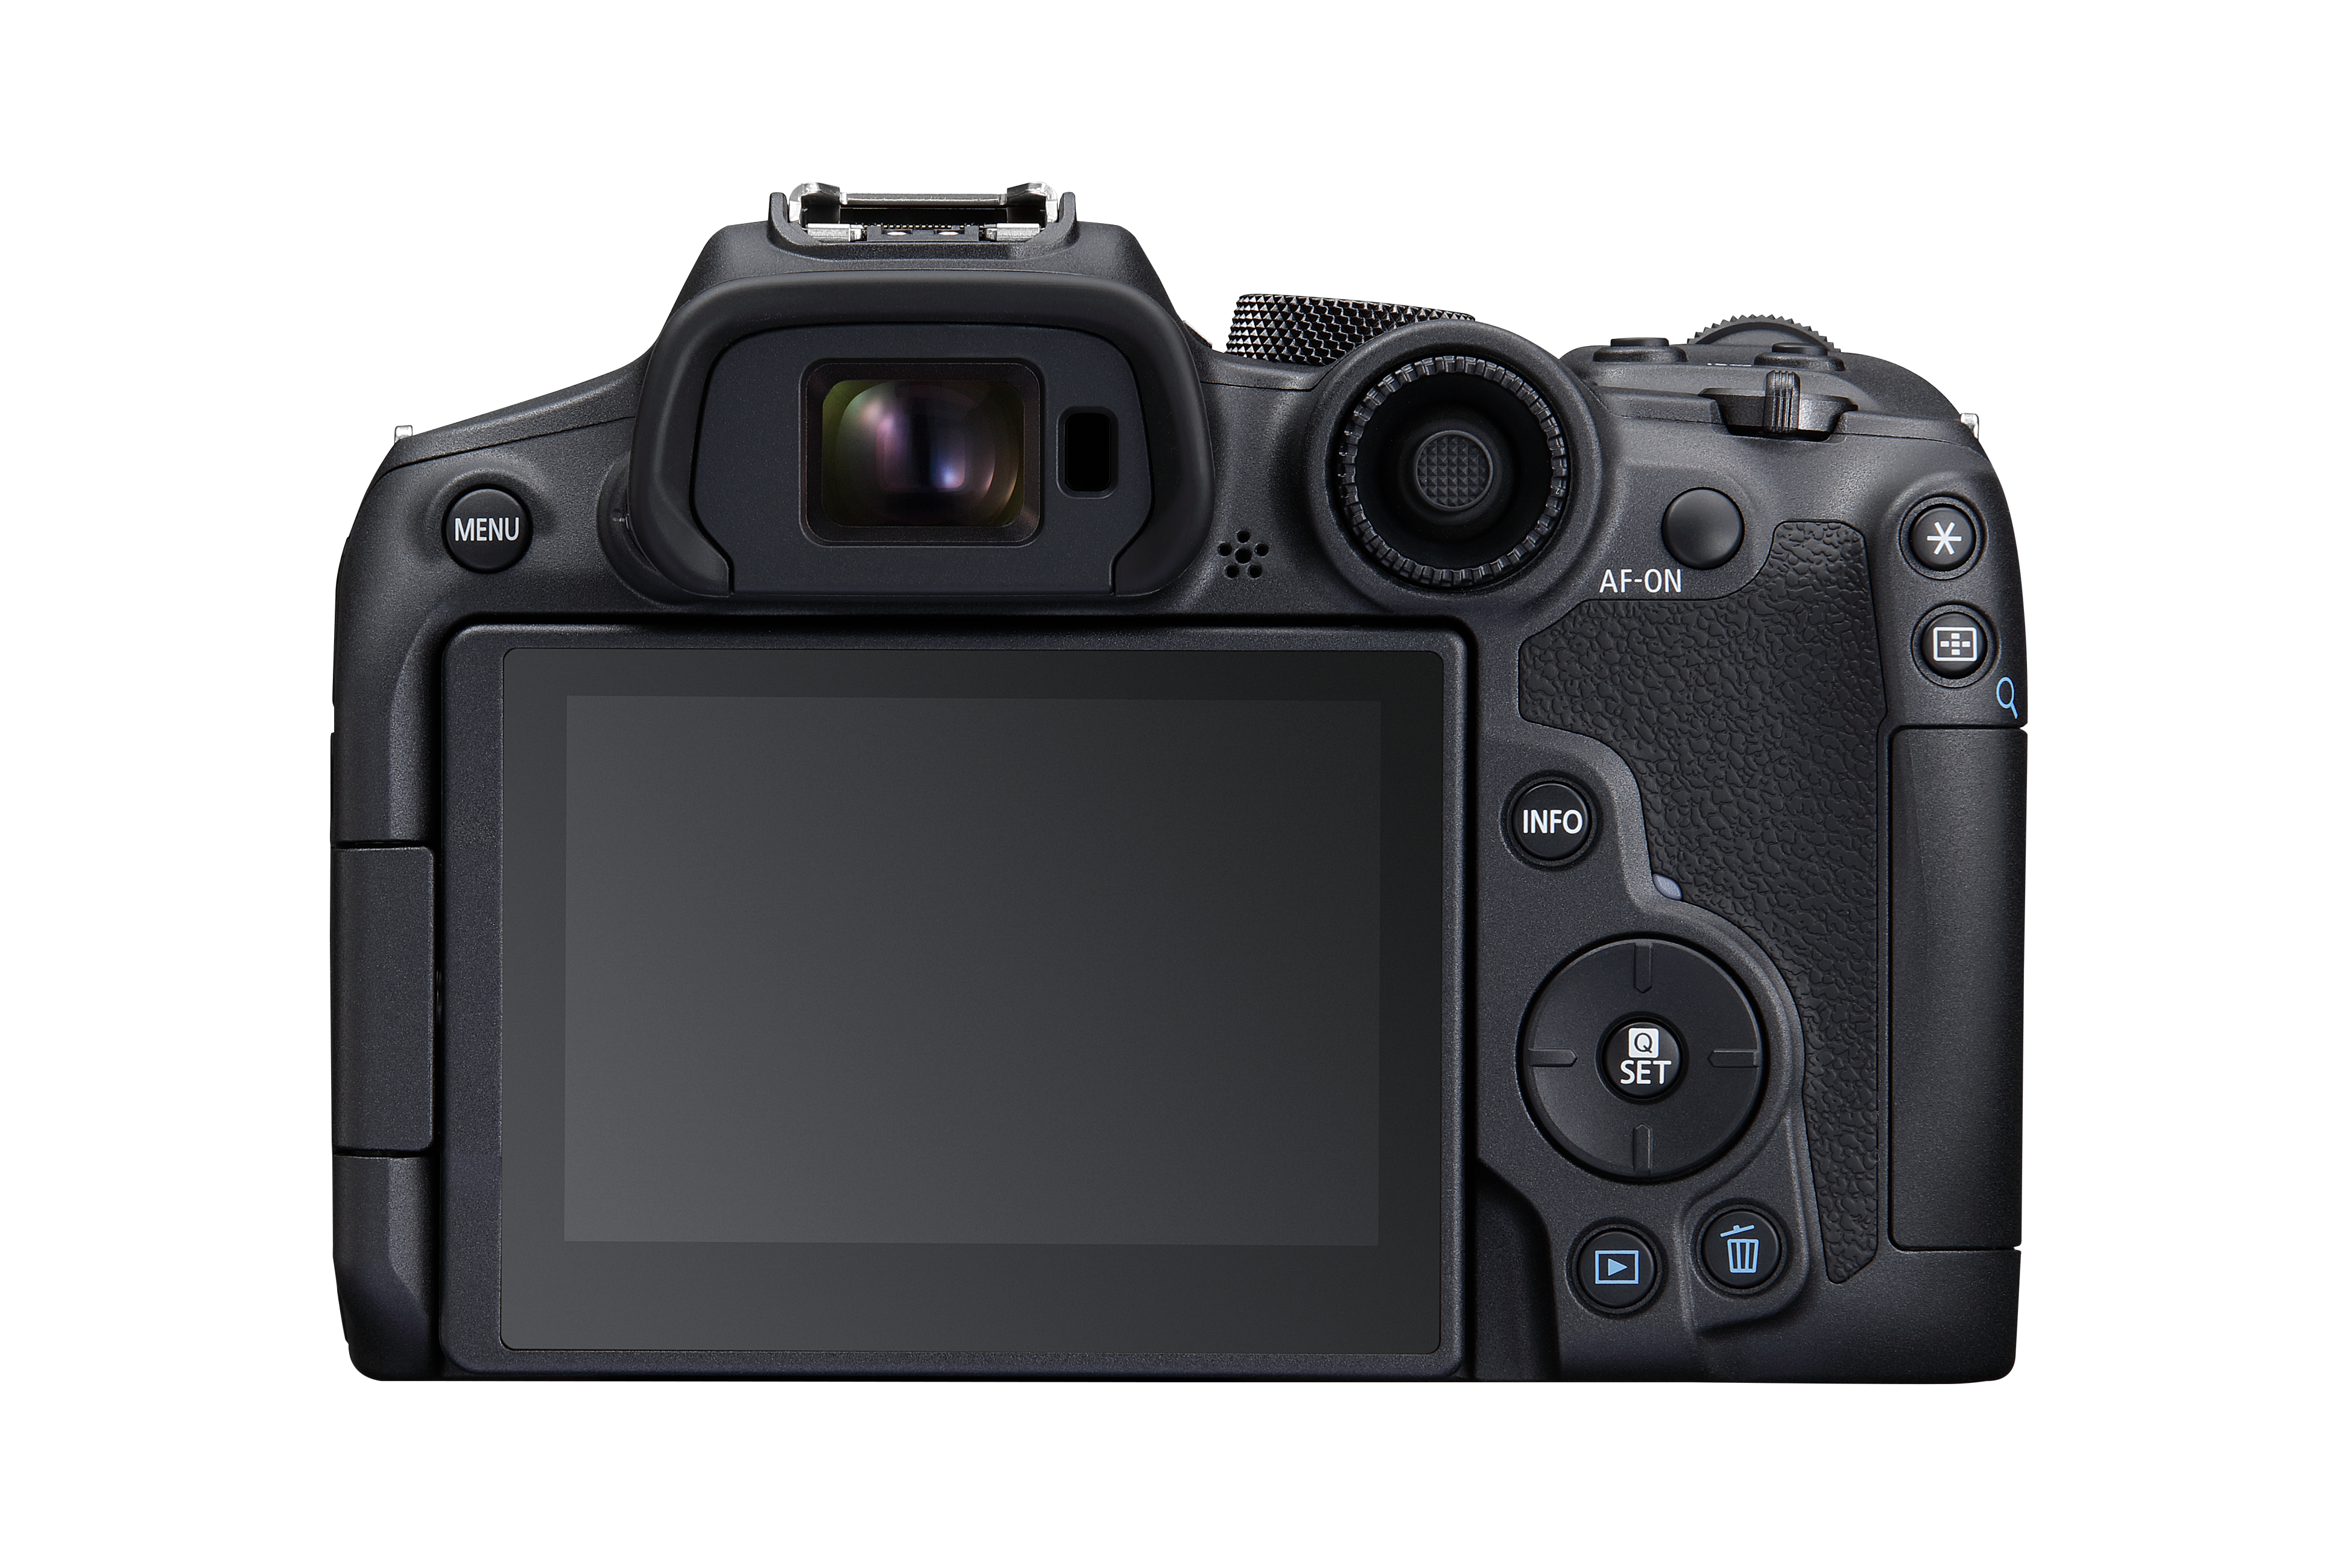 Canon EOS R7 Body Only with EF-RF Adapter Canon Mirrorless